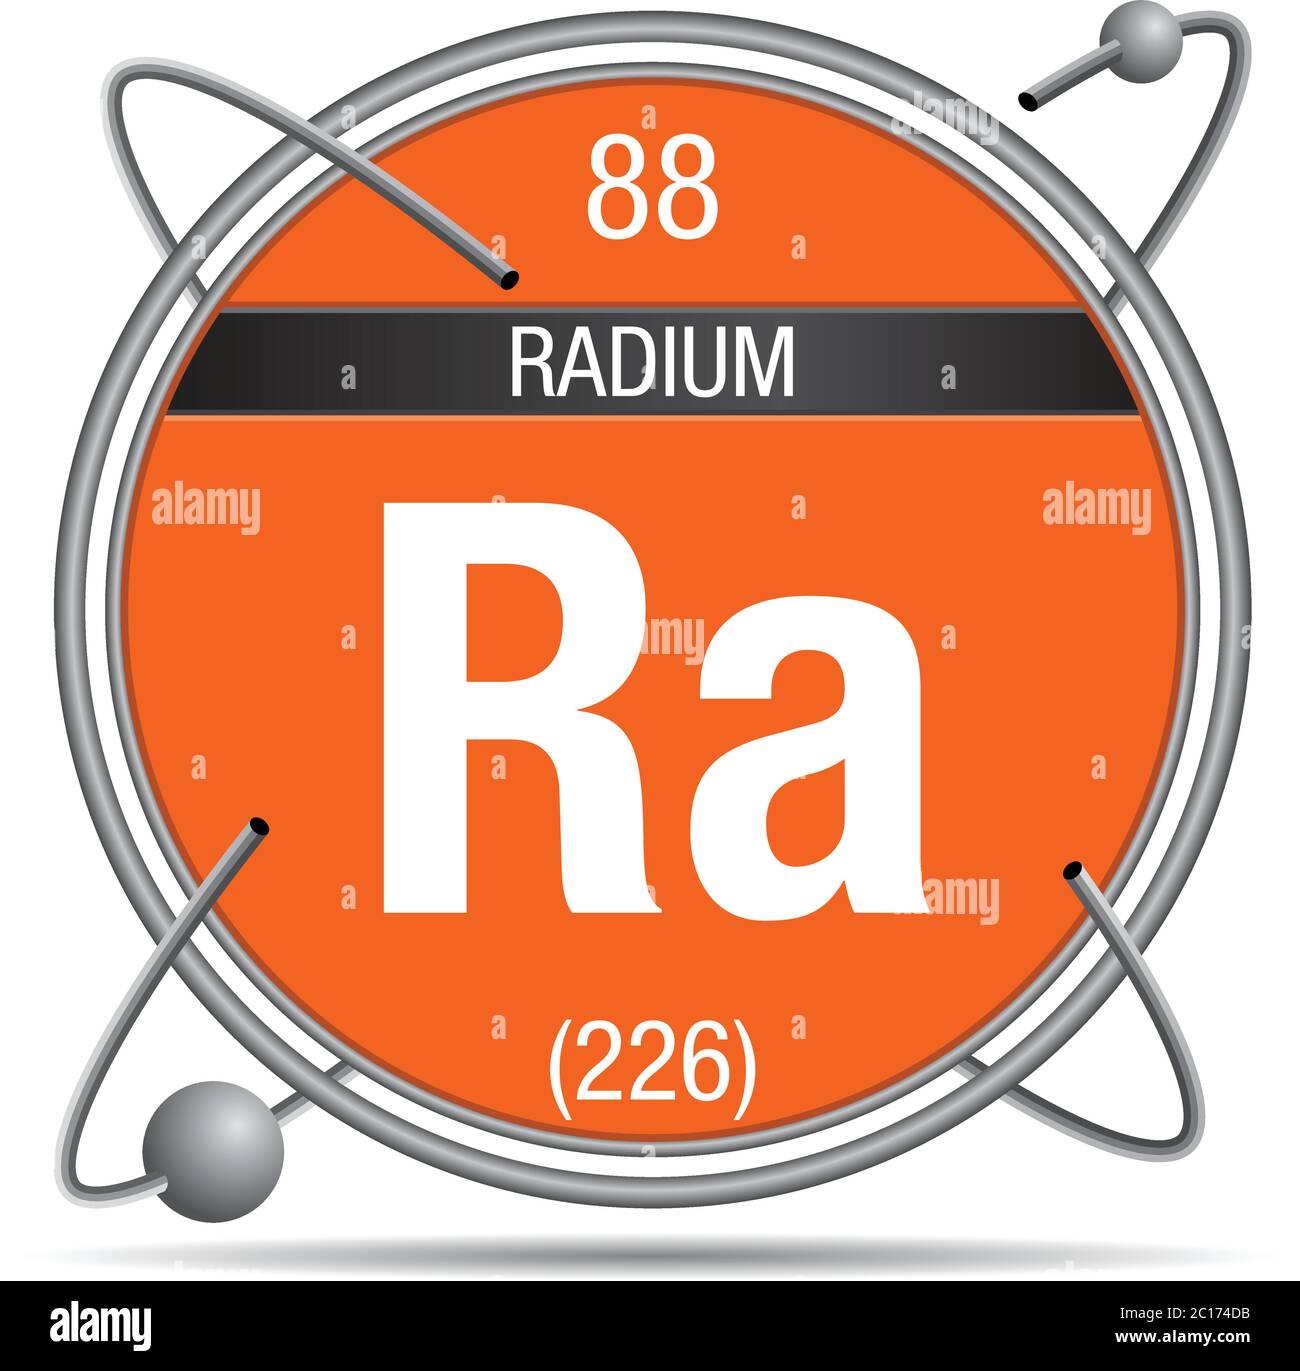 Radium symbol  inside a metal ring with colored background and spheres orbiting around. Element number 88 of the Periodic Table of the Elements Stock Vector